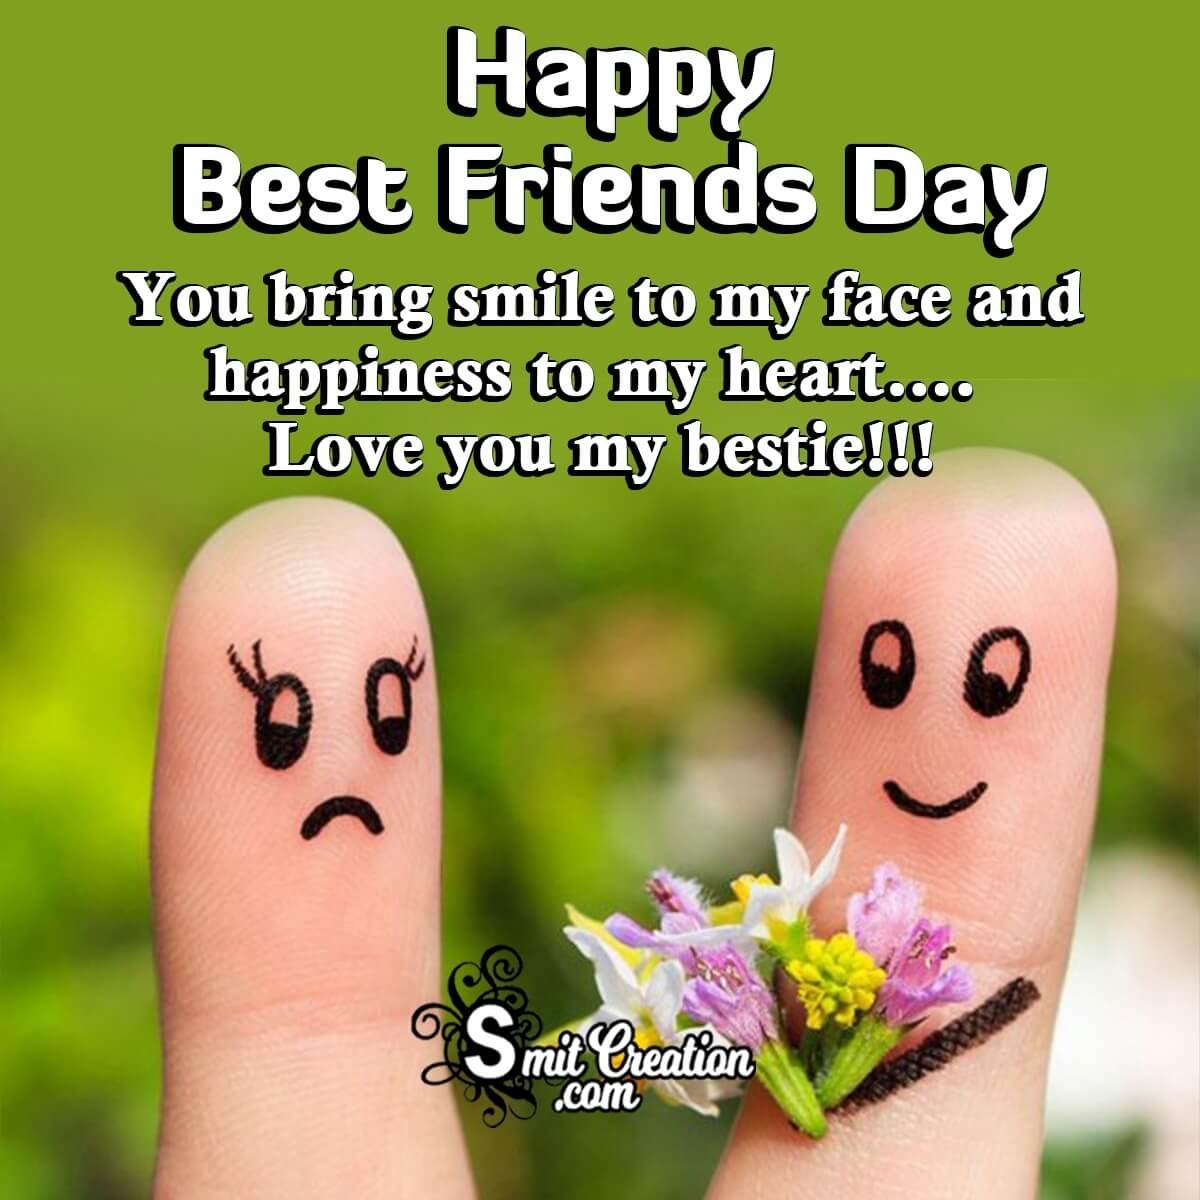 Happy Best Friends Day Wishes, Messages, Quotes Image